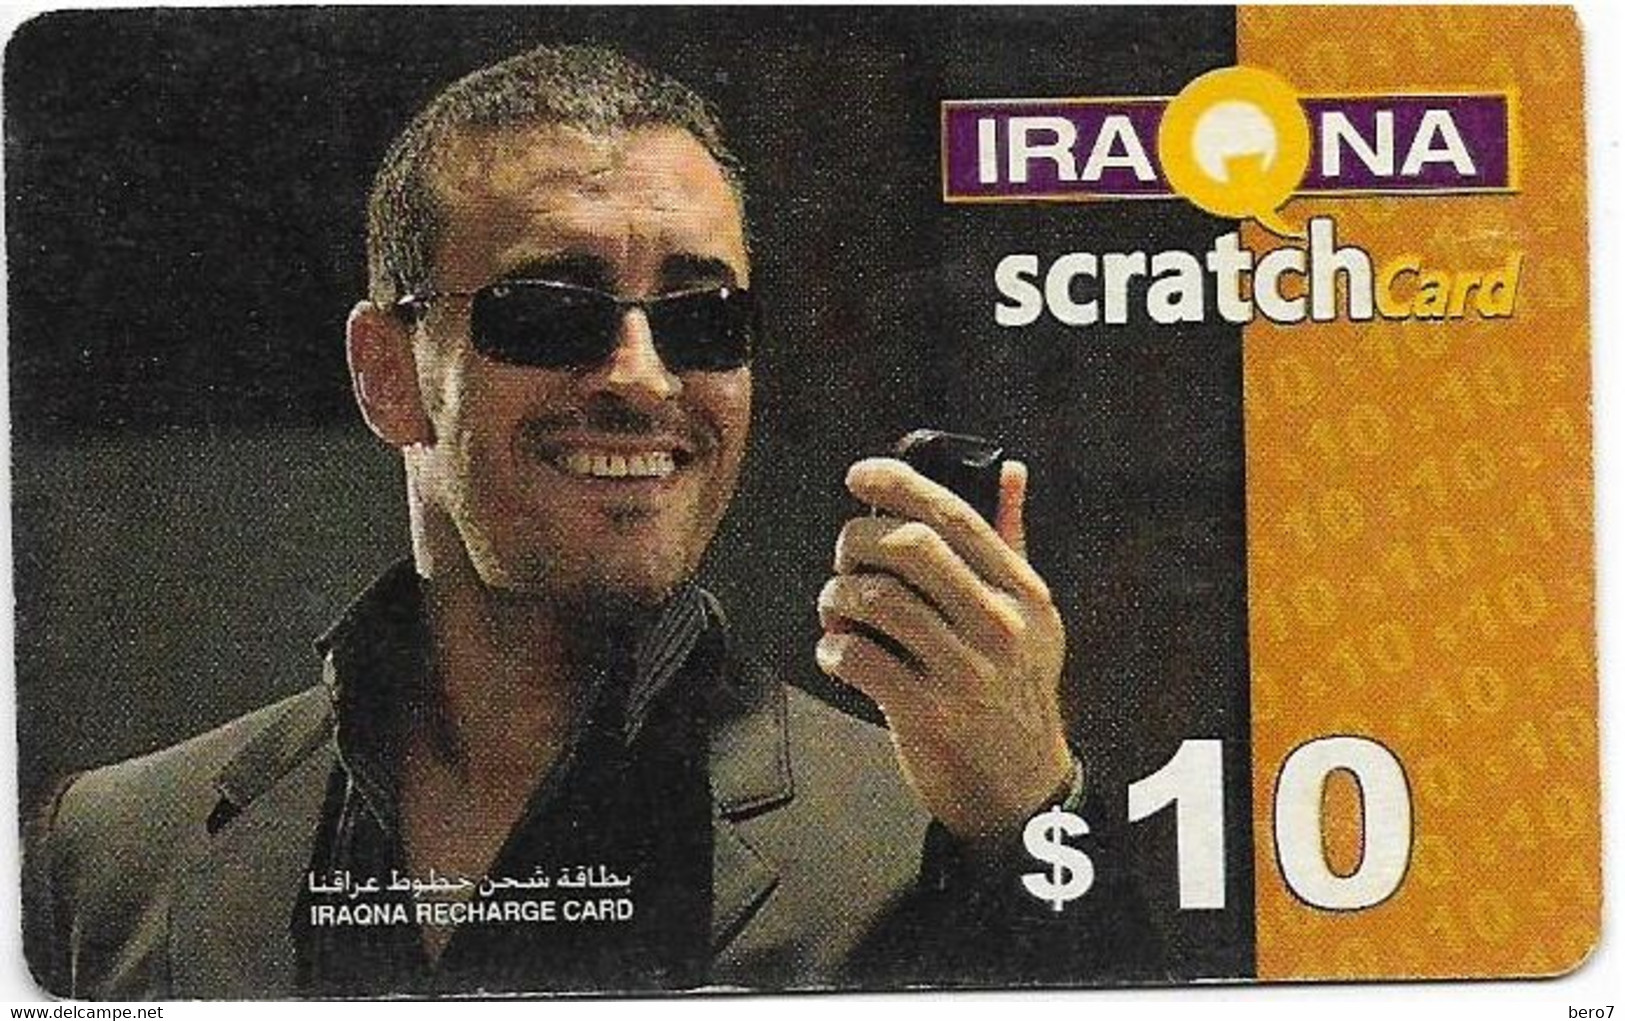 IRAQ - Iraqna - Man With Mobile $10 Scratch Card , Refill Card  Expiry Date : 31/12/2006 [used] - Iraq